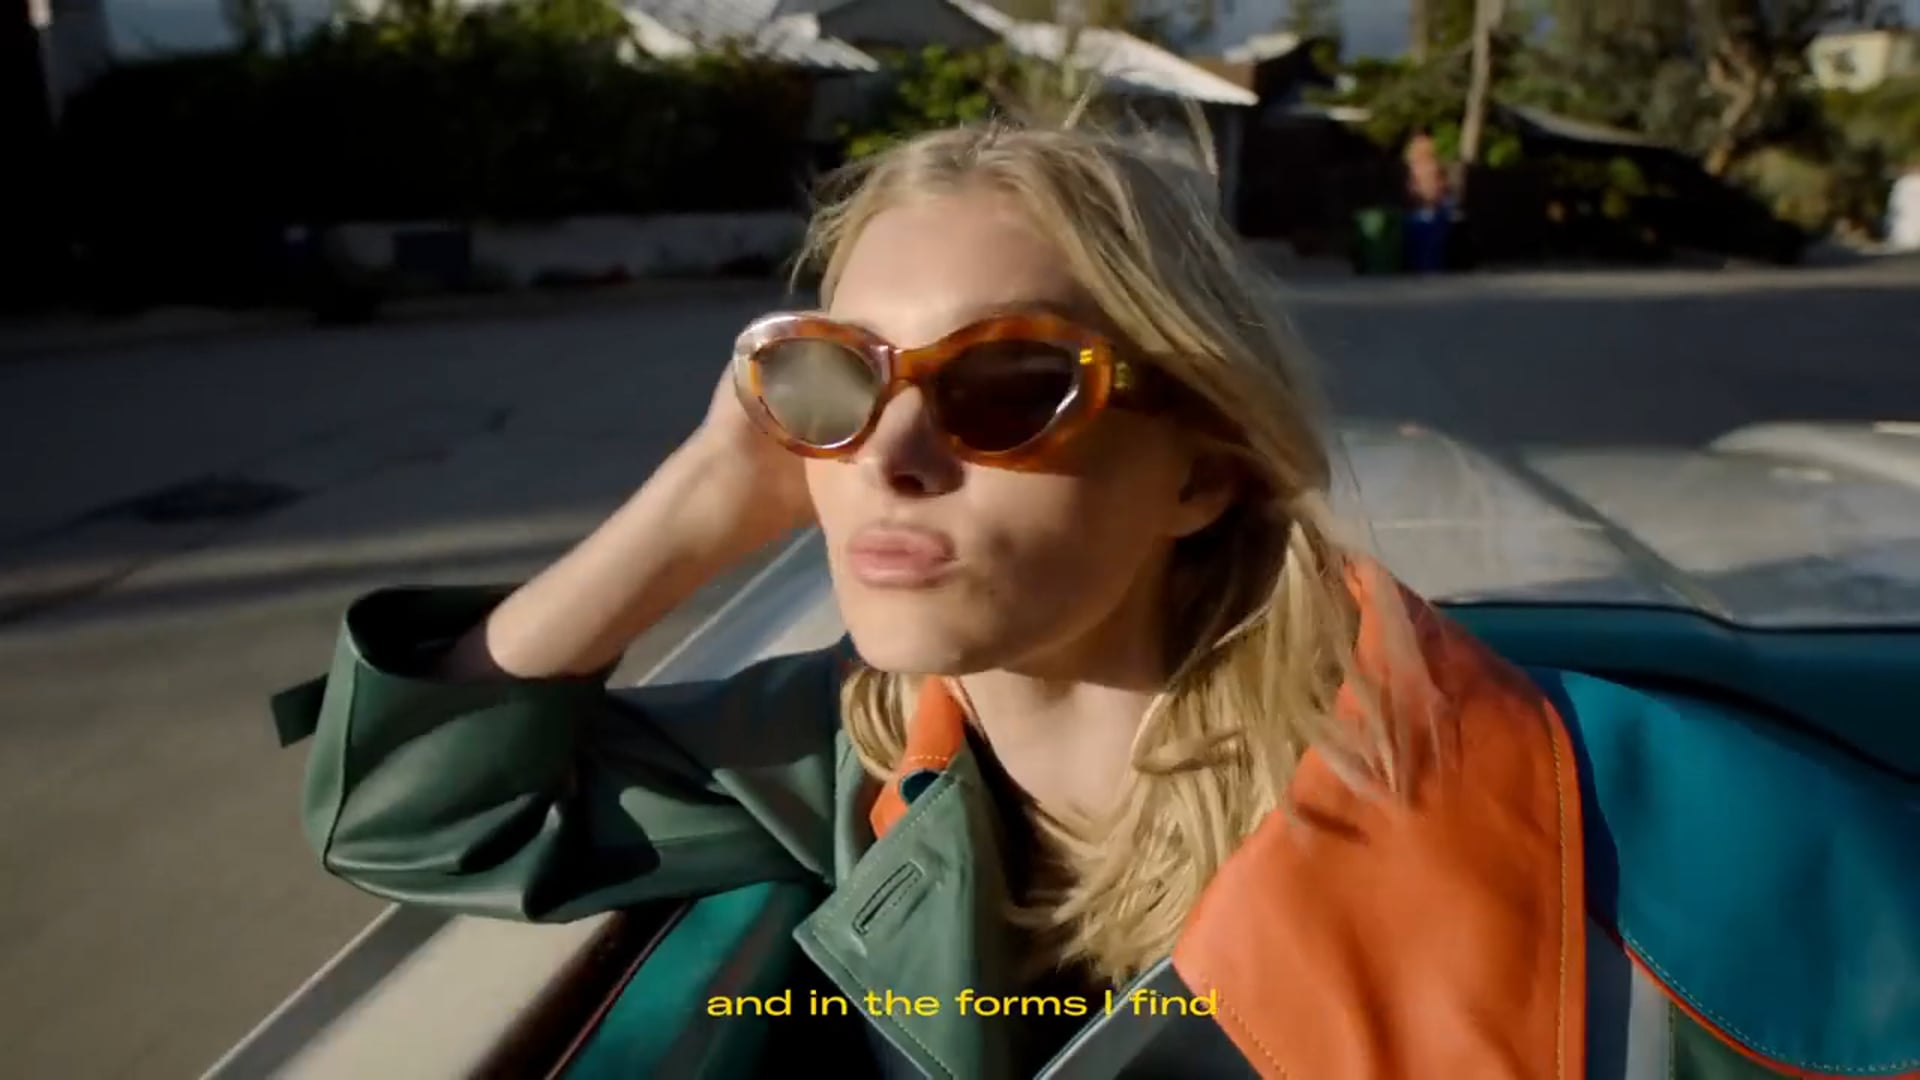 Just Right - Hosk For Chimi (Campaign Film)